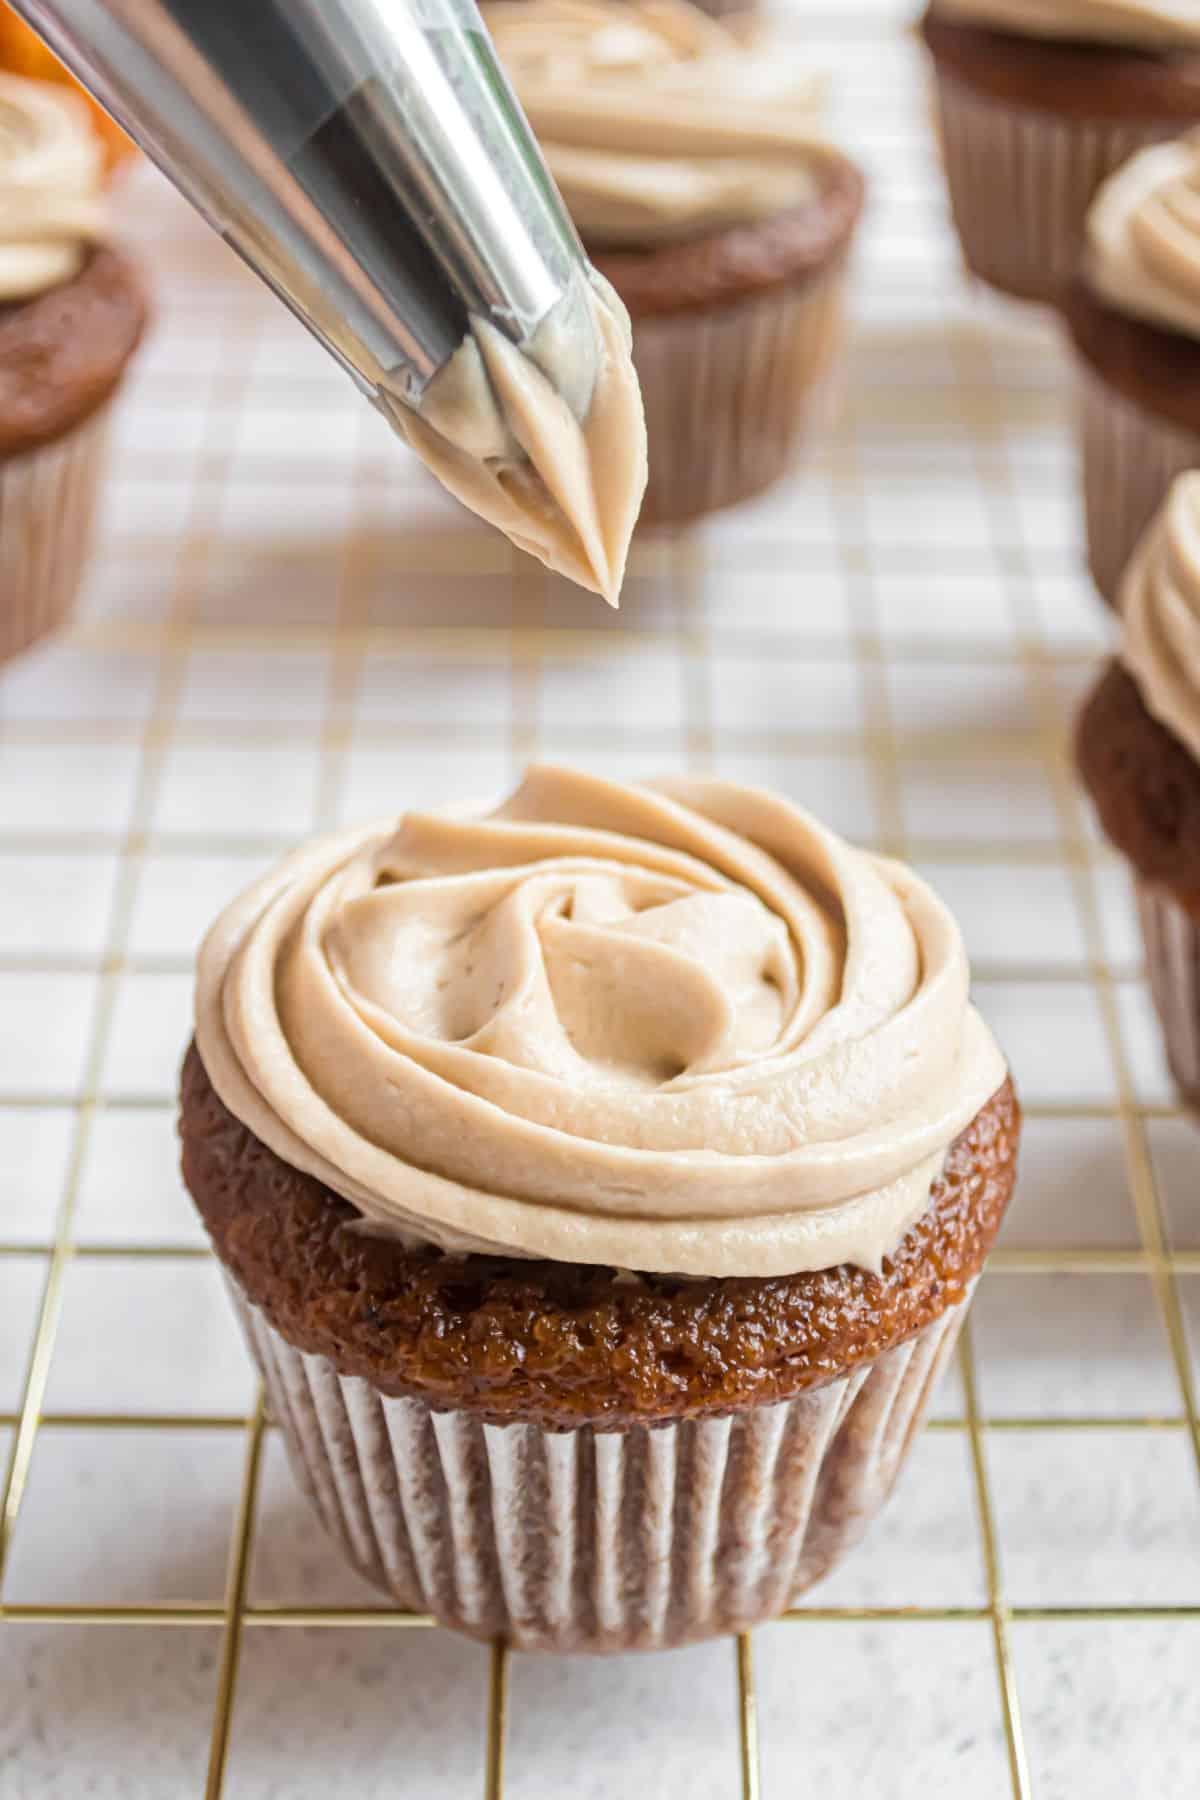 Pumpkin cupcake being frosted with maple flavored cream cheese frosting on a wire rack.